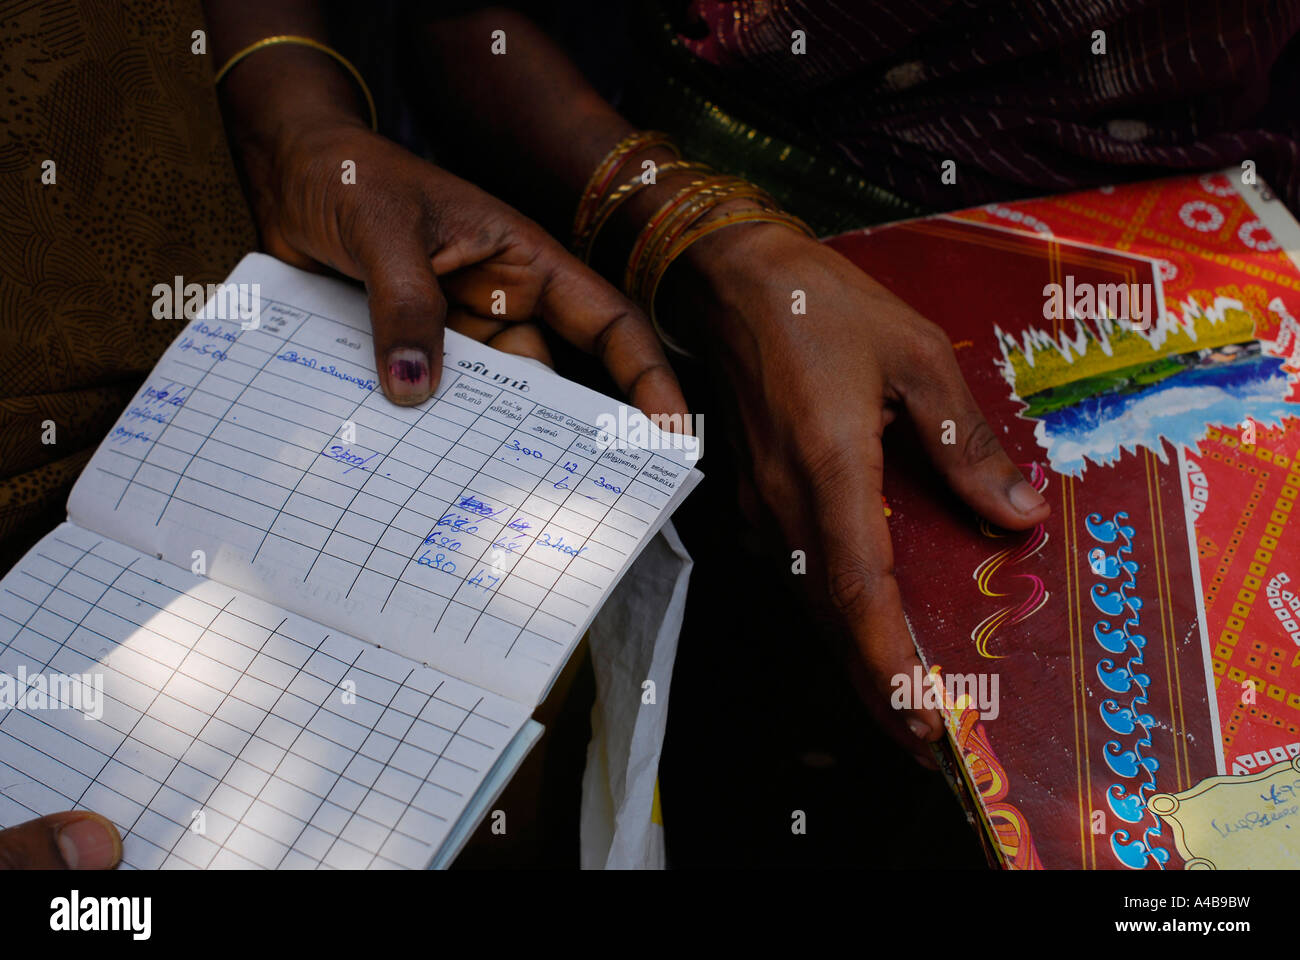 Stock image of small business loans meeting with tribal village dalit women near Chennai Tamil Nadu India Stock Photo